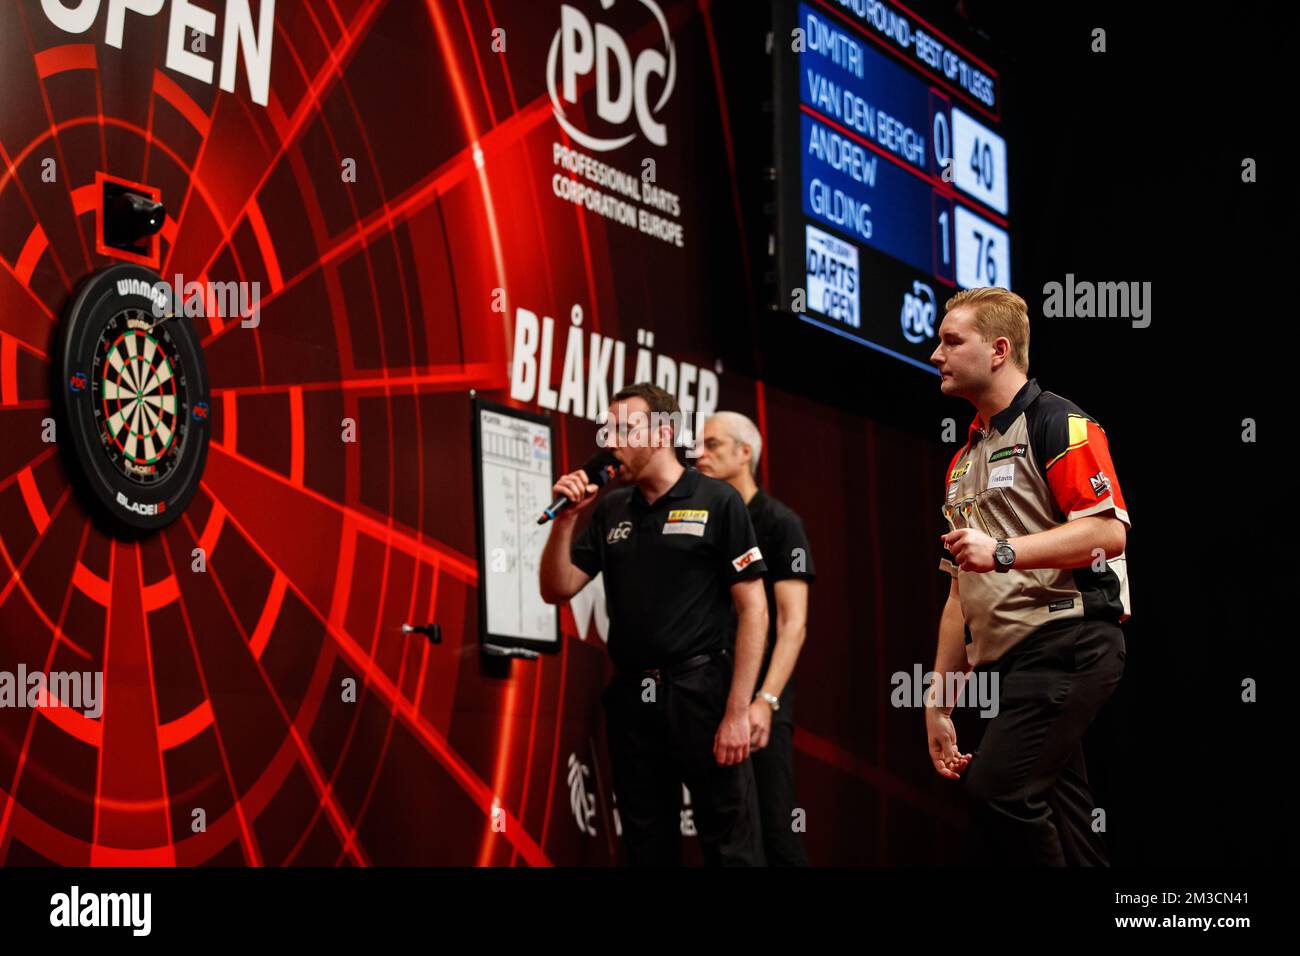 Belgian Dimitri Van den Bergh pictured in action during the second day of  the Belgian Darts Open, a tournament in the European Tour that takes places  from September 23 until September 25